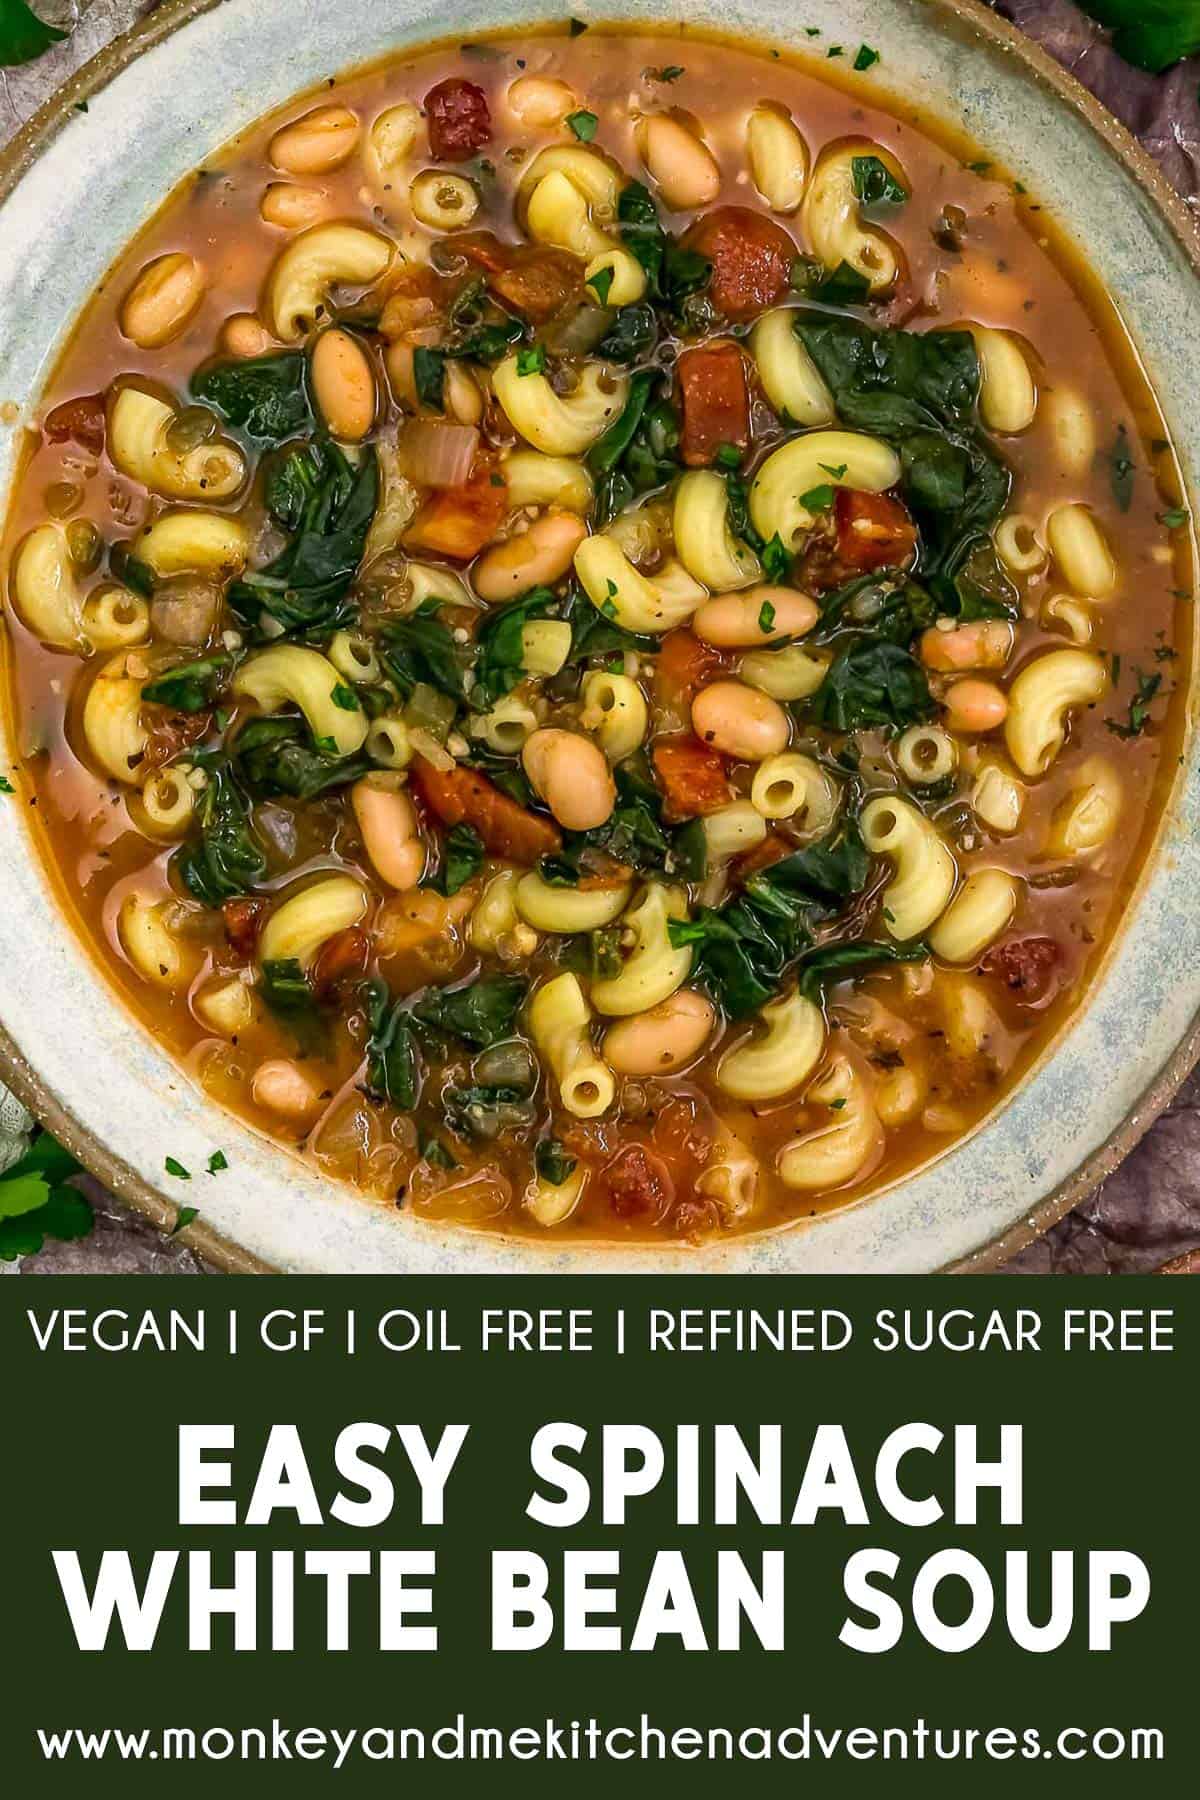 Easy Spinach White Bean Soup with text description